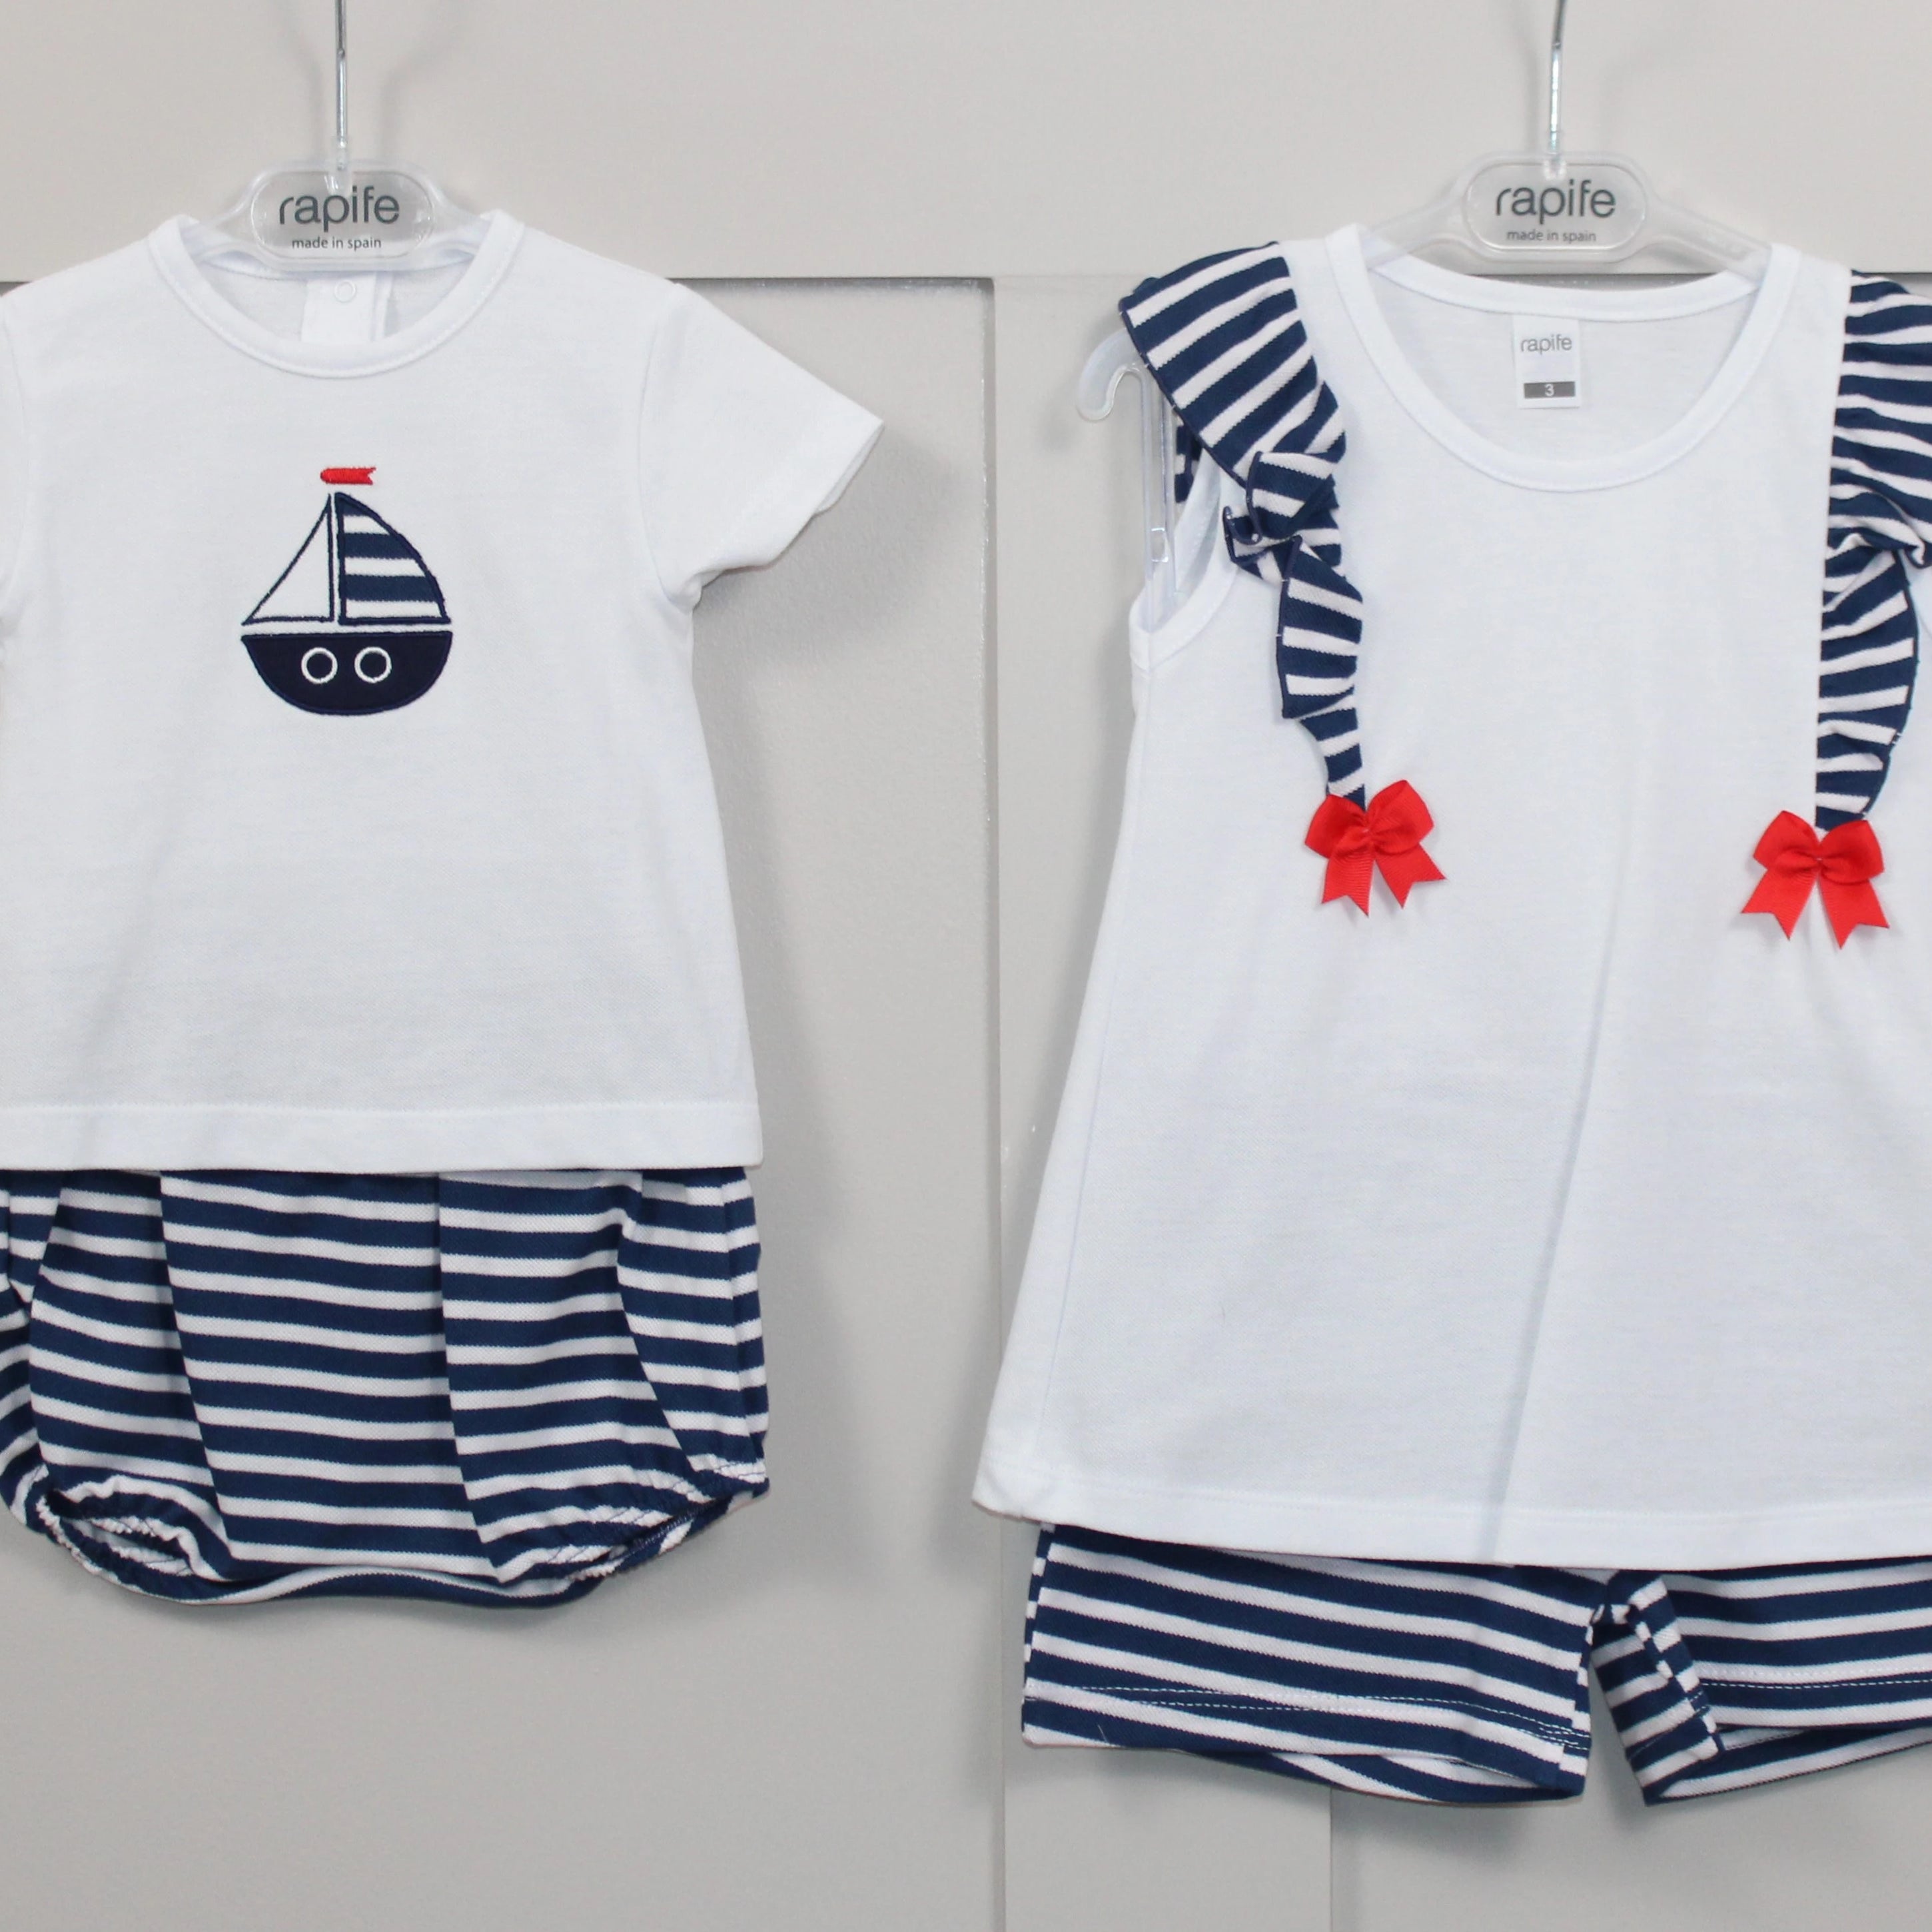 rapife nautical summer collection